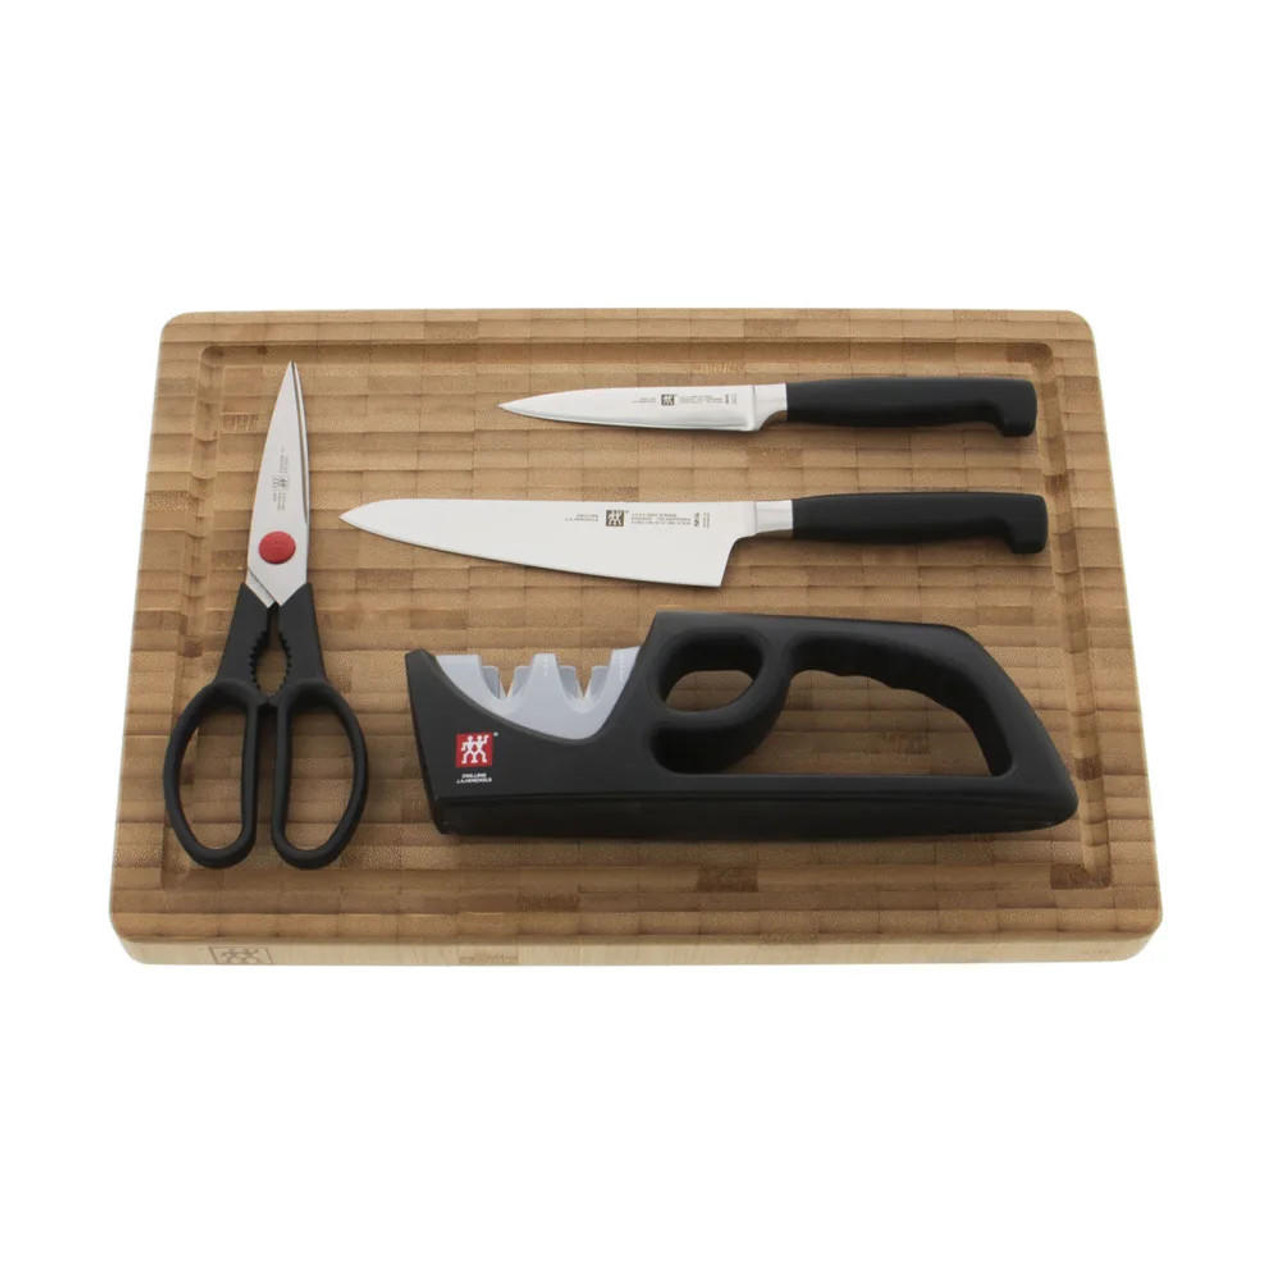  Henckels Paring Knife Four Star 5 Piece Knife Set with Bamboo Cutting Board 